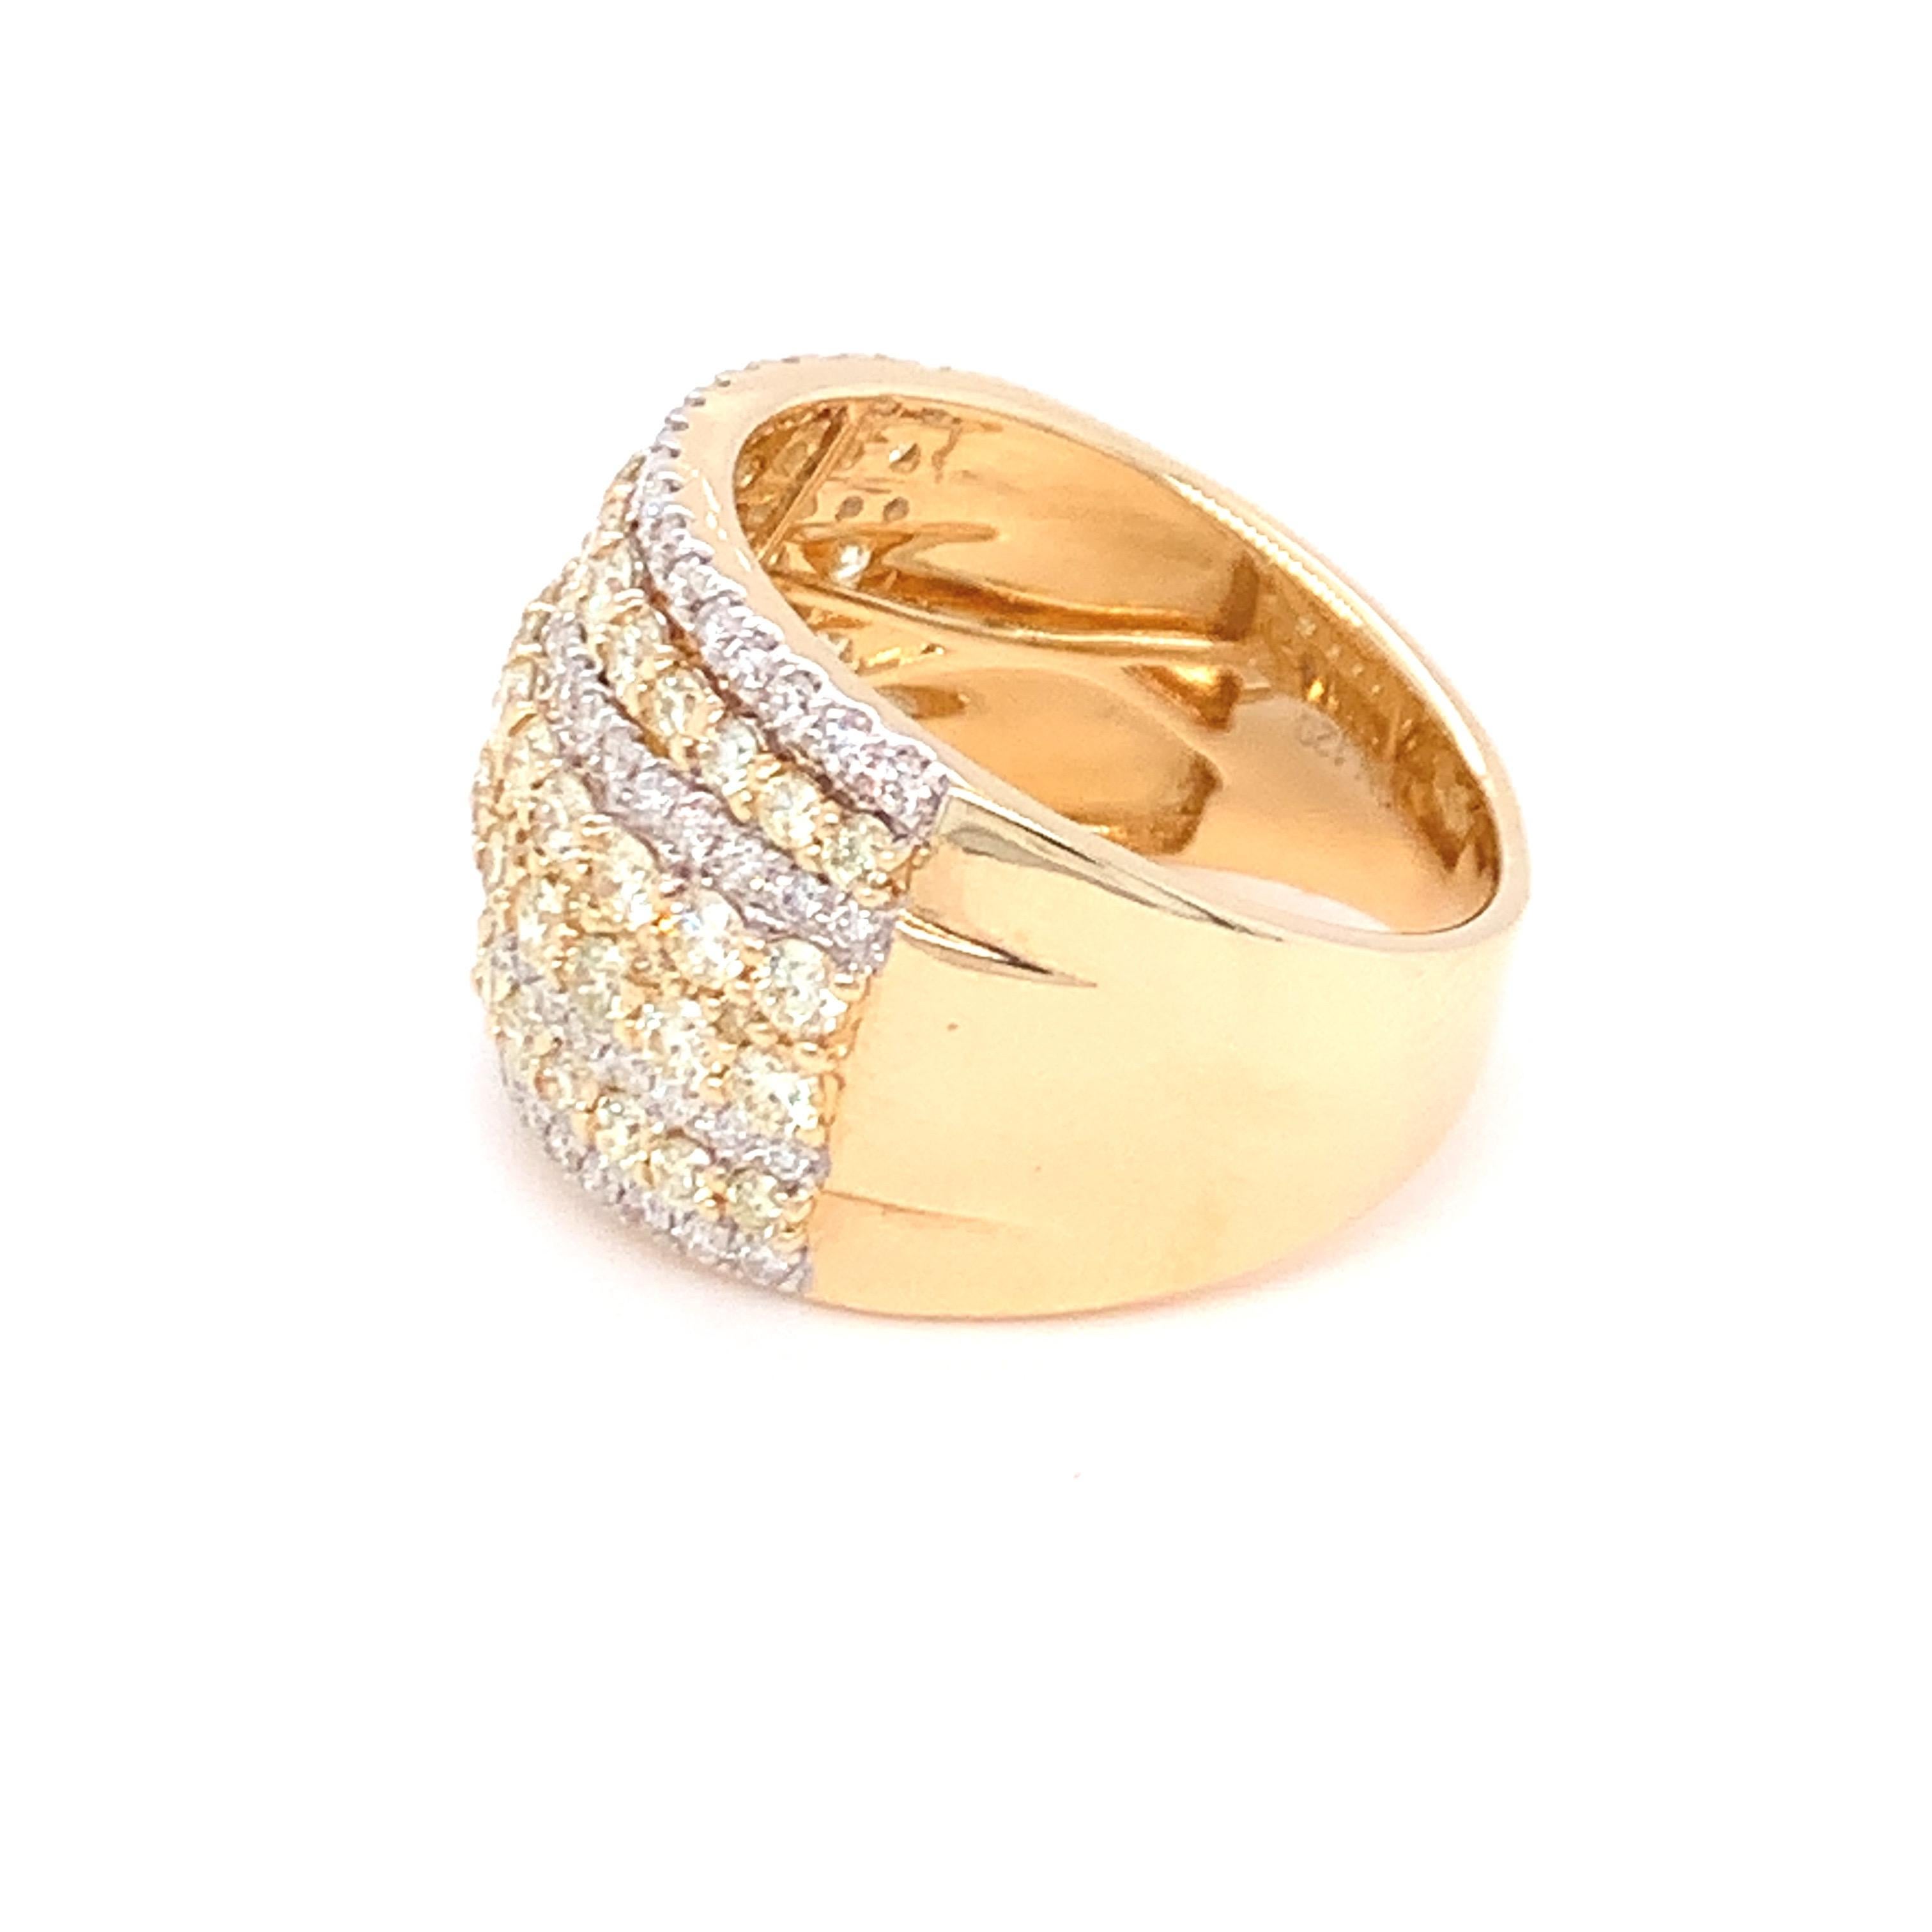 2.08 Carat Diamond Band Ring in 14k Yellow Gold For Sale 6